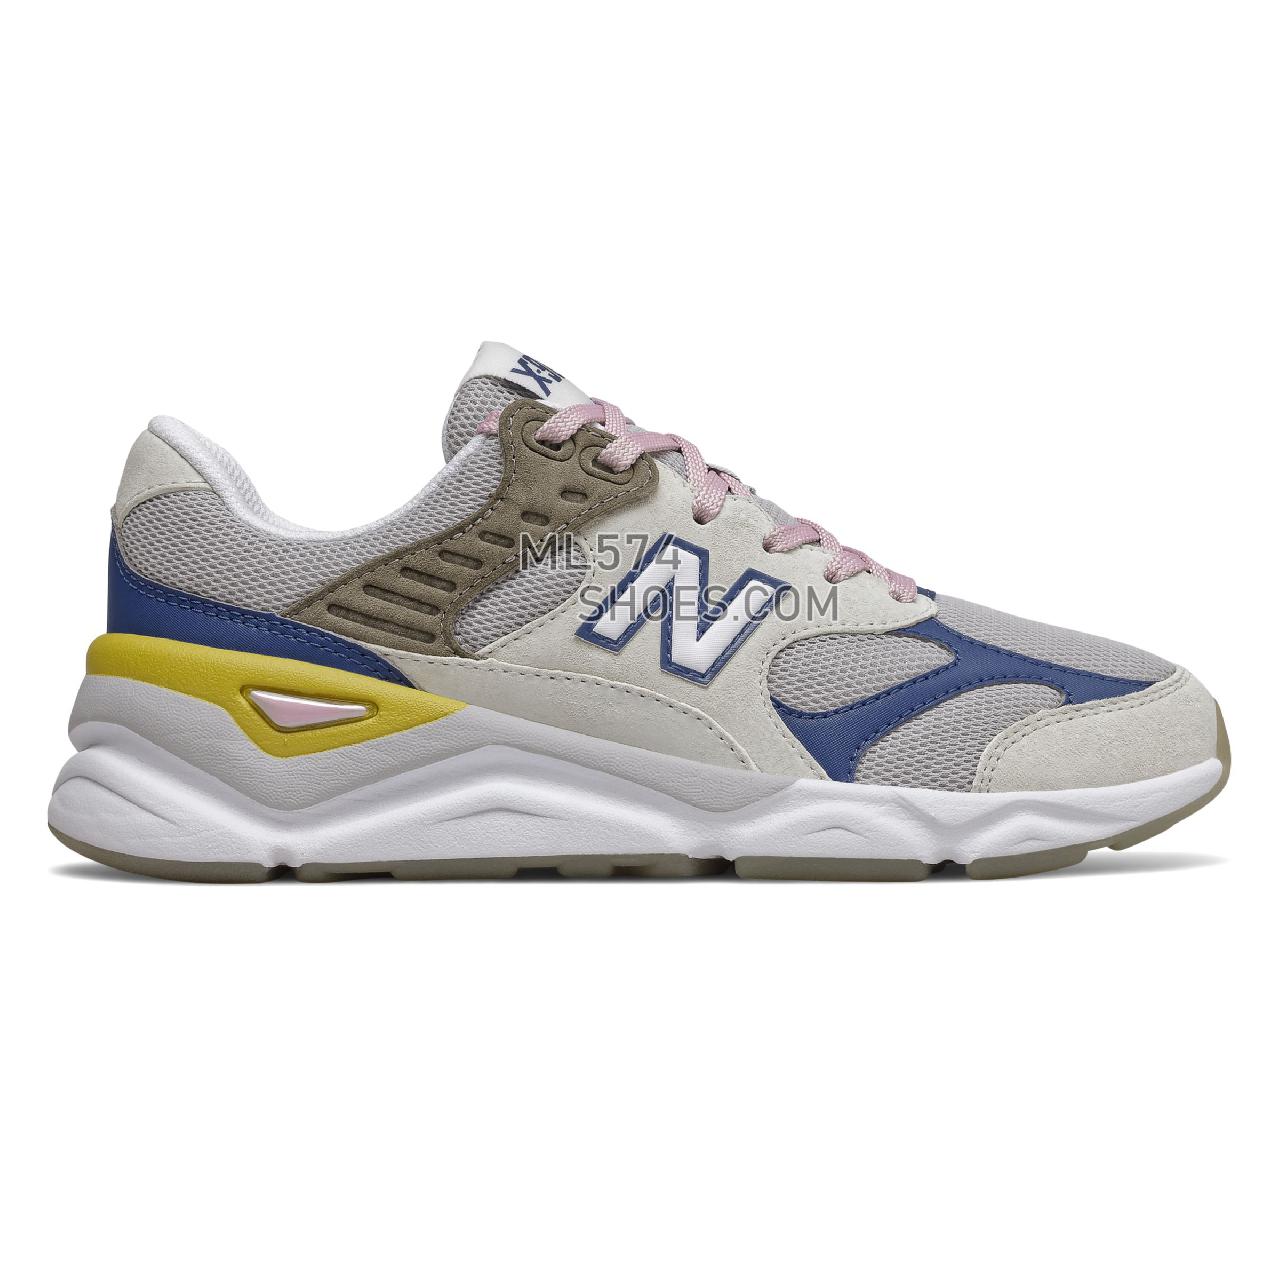 New Balance Reformation X-90 Reconstructed - Women's X90 Reconstructed Classic - Sea Salt with Andromeda Blue - WSX90REG